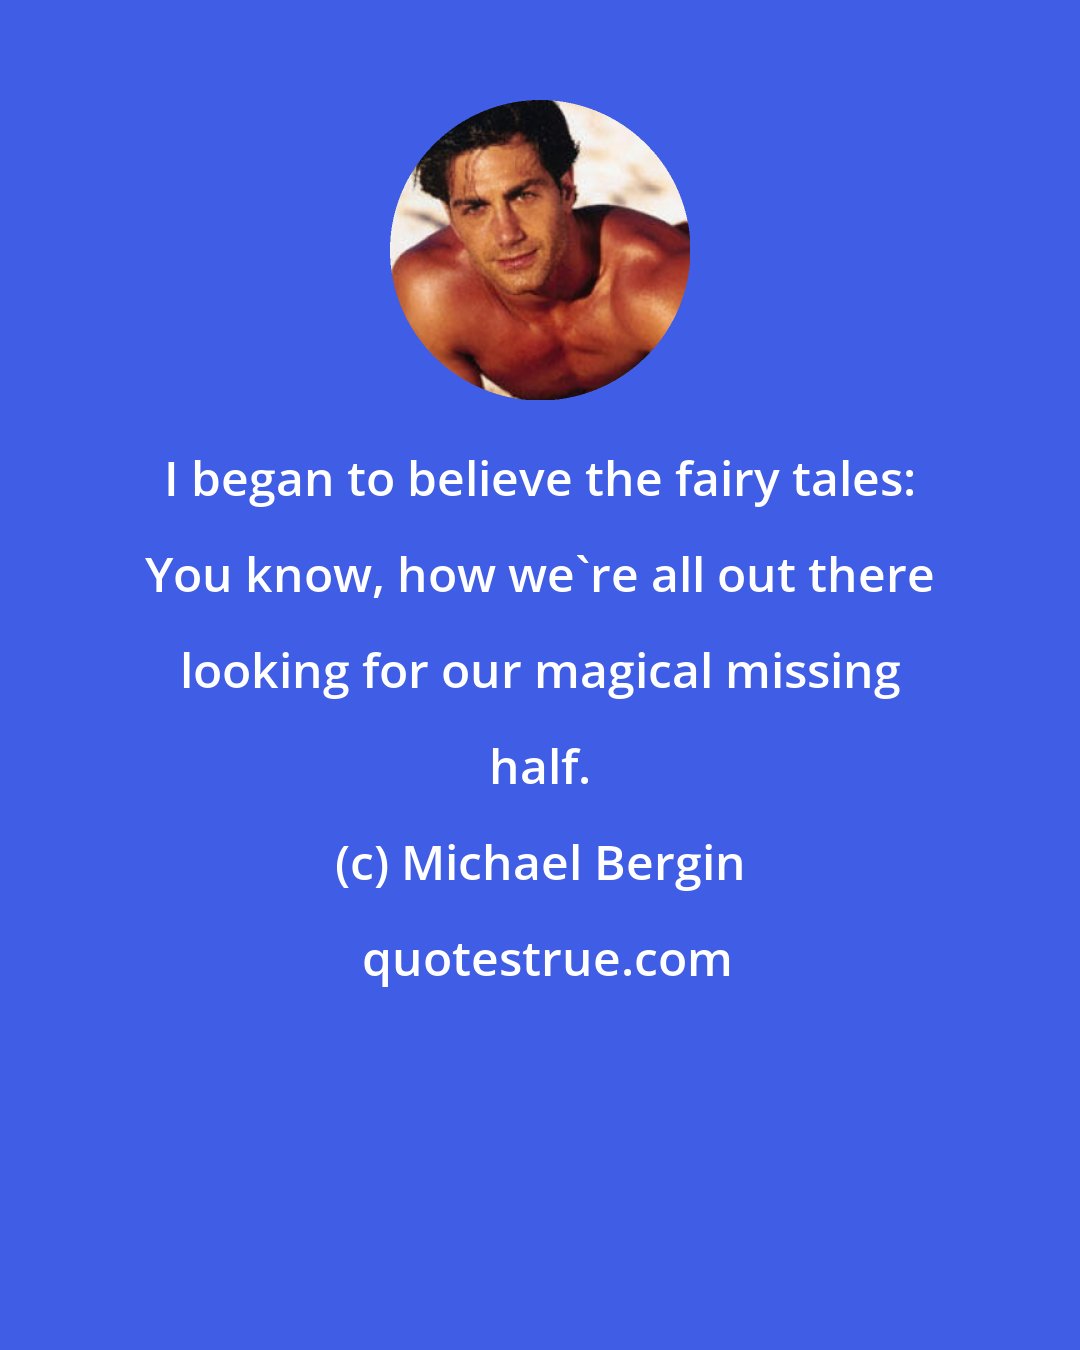 Michael Bergin: I began to believe the fairy tales: You know, how we're all out there looking for our magical missing half.